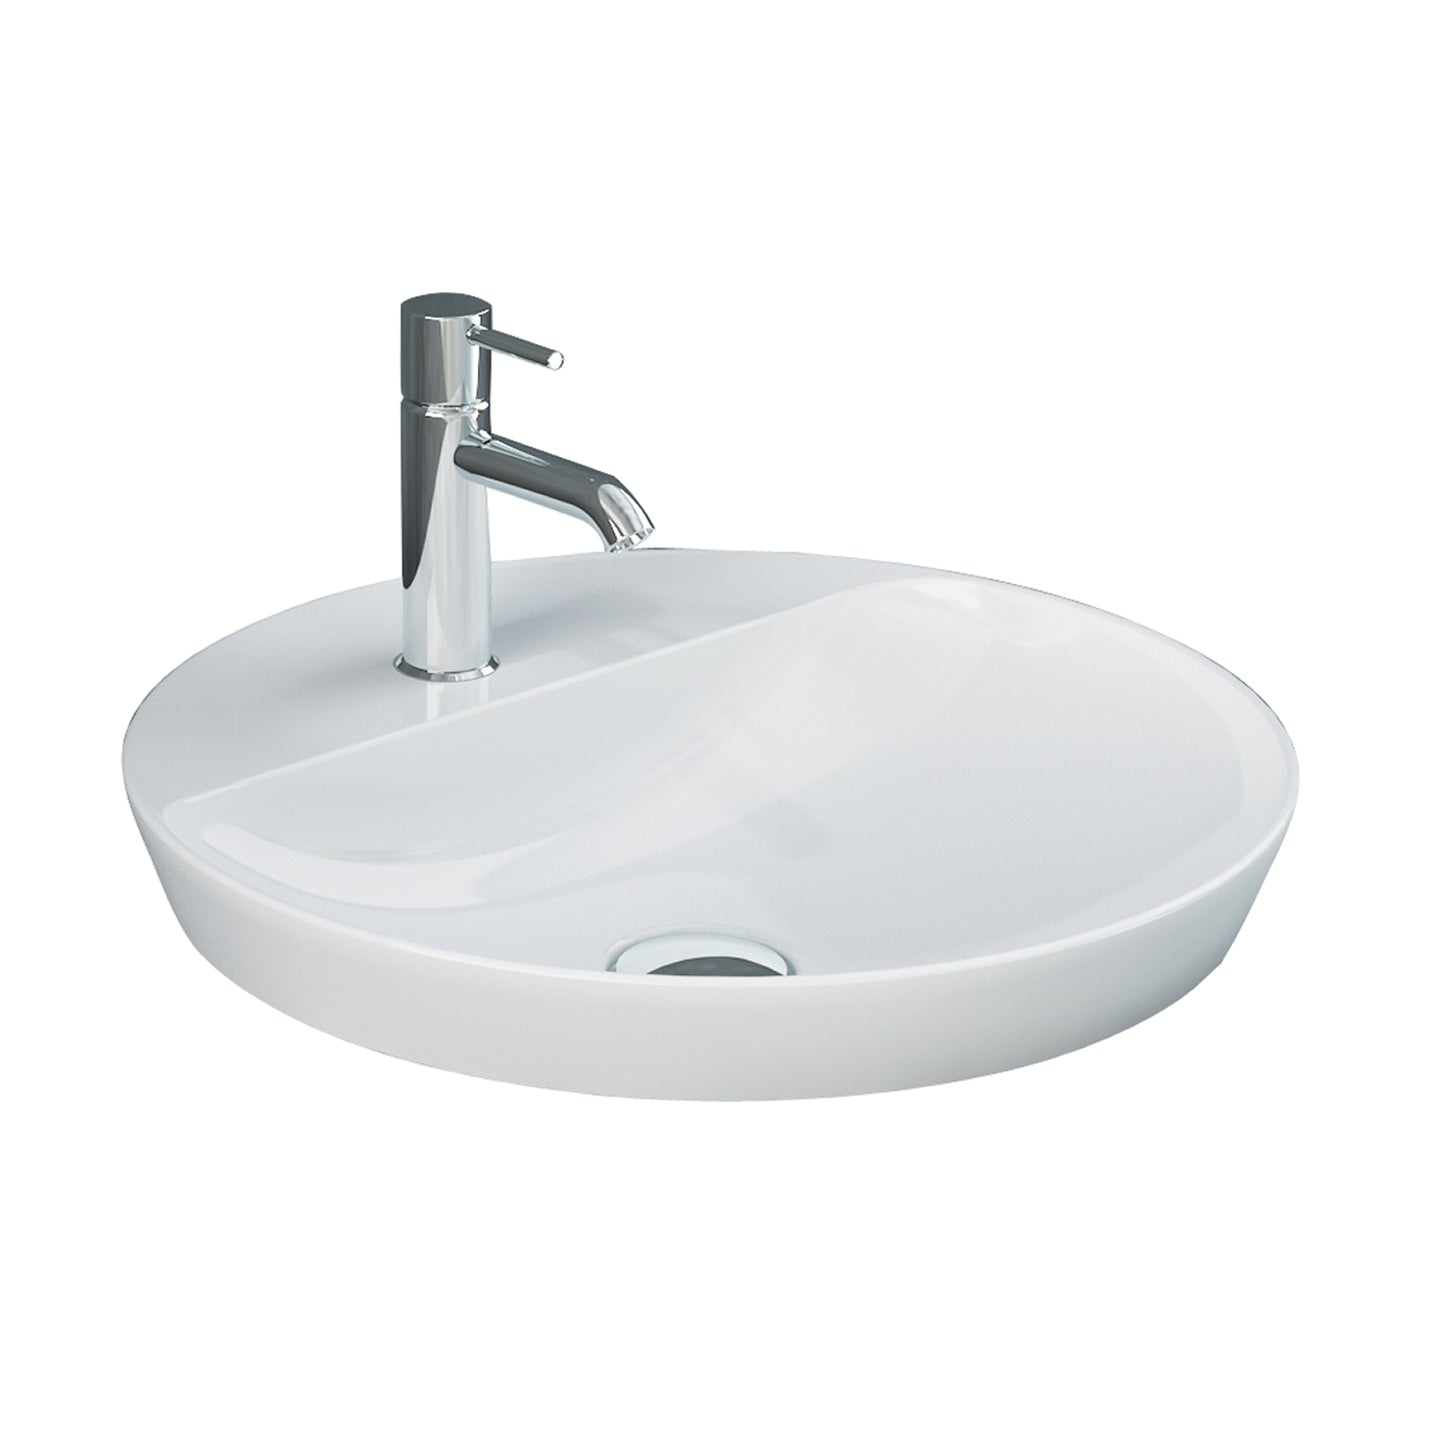 Variant 16 1/2" Round Drop In Lavatory Sink with 1 Faucet Hole in White